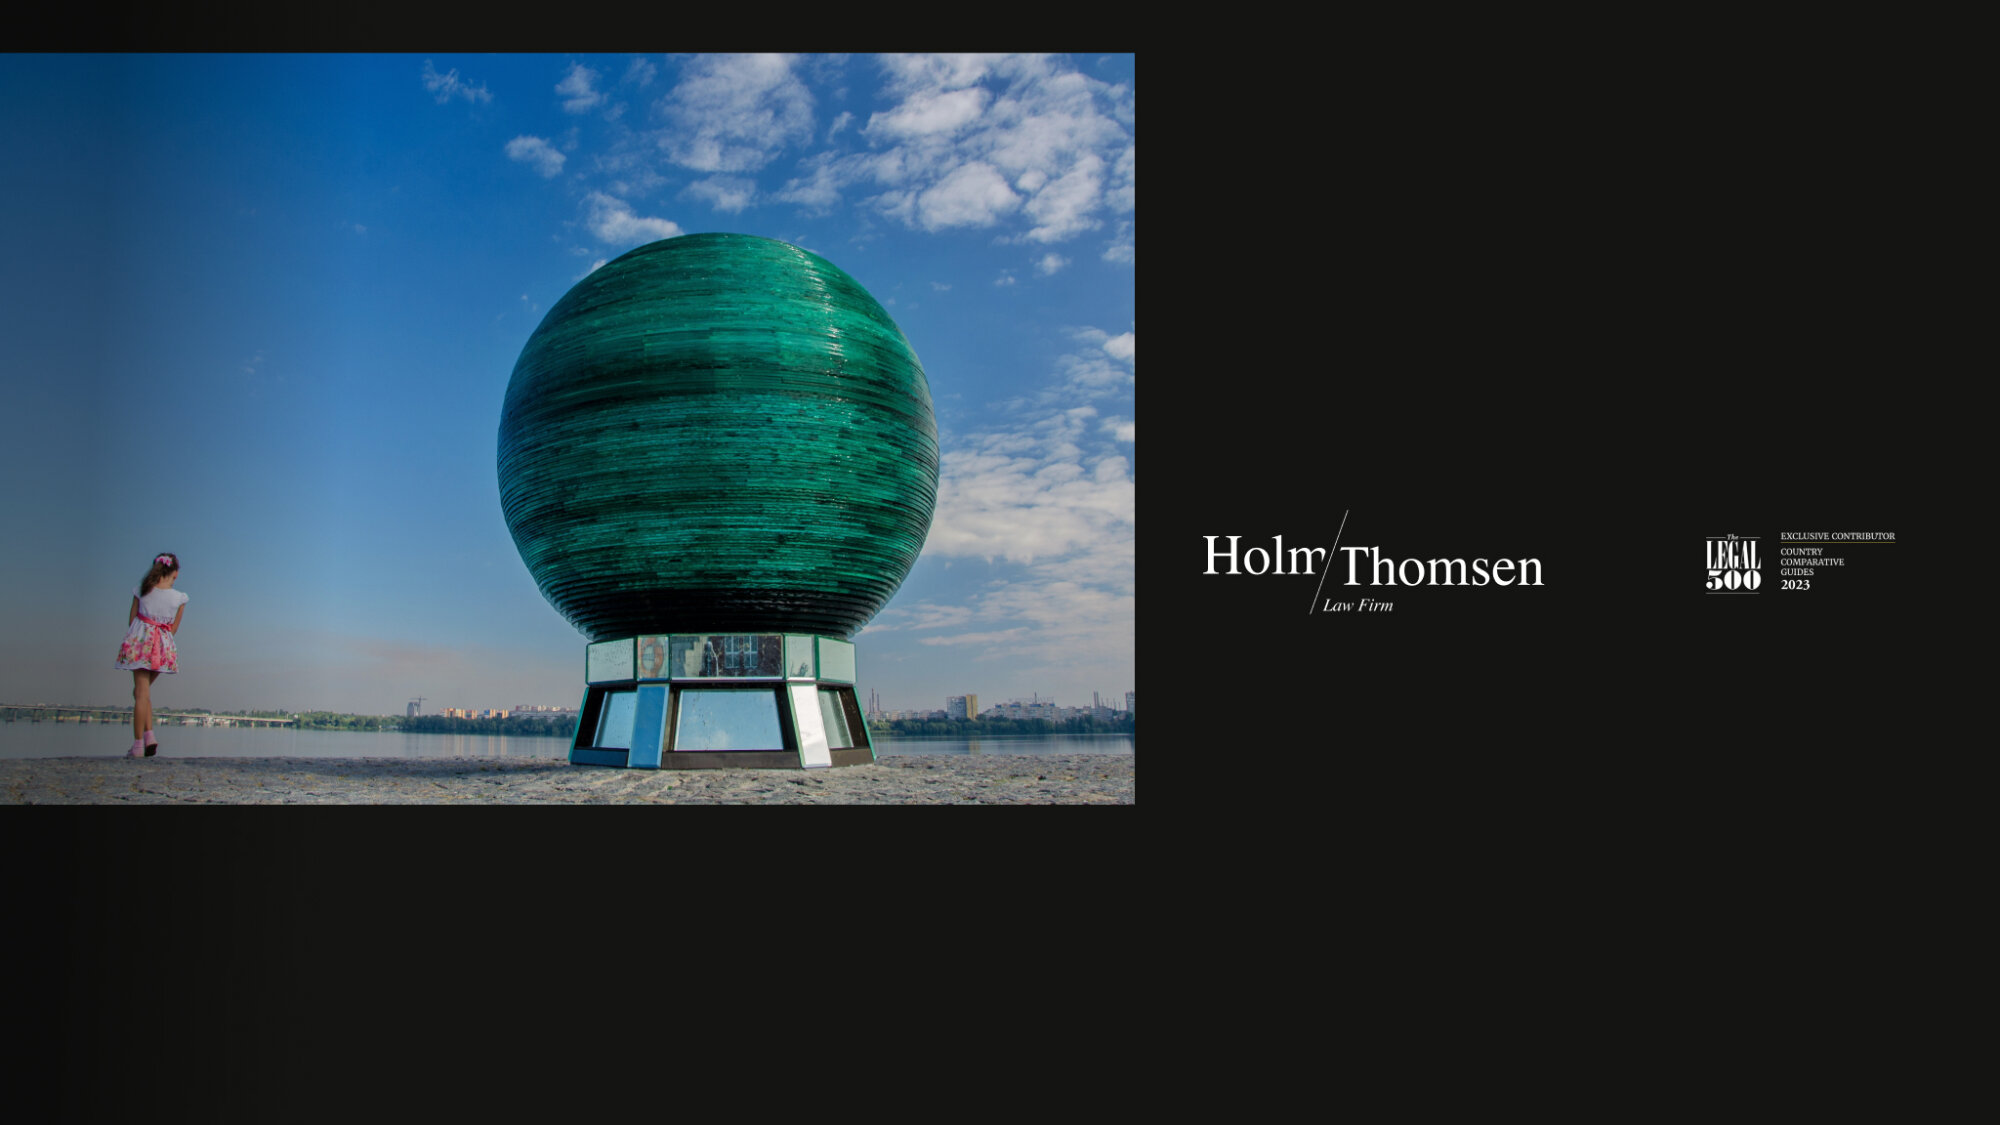 Holm/Thomsen Law cover photo